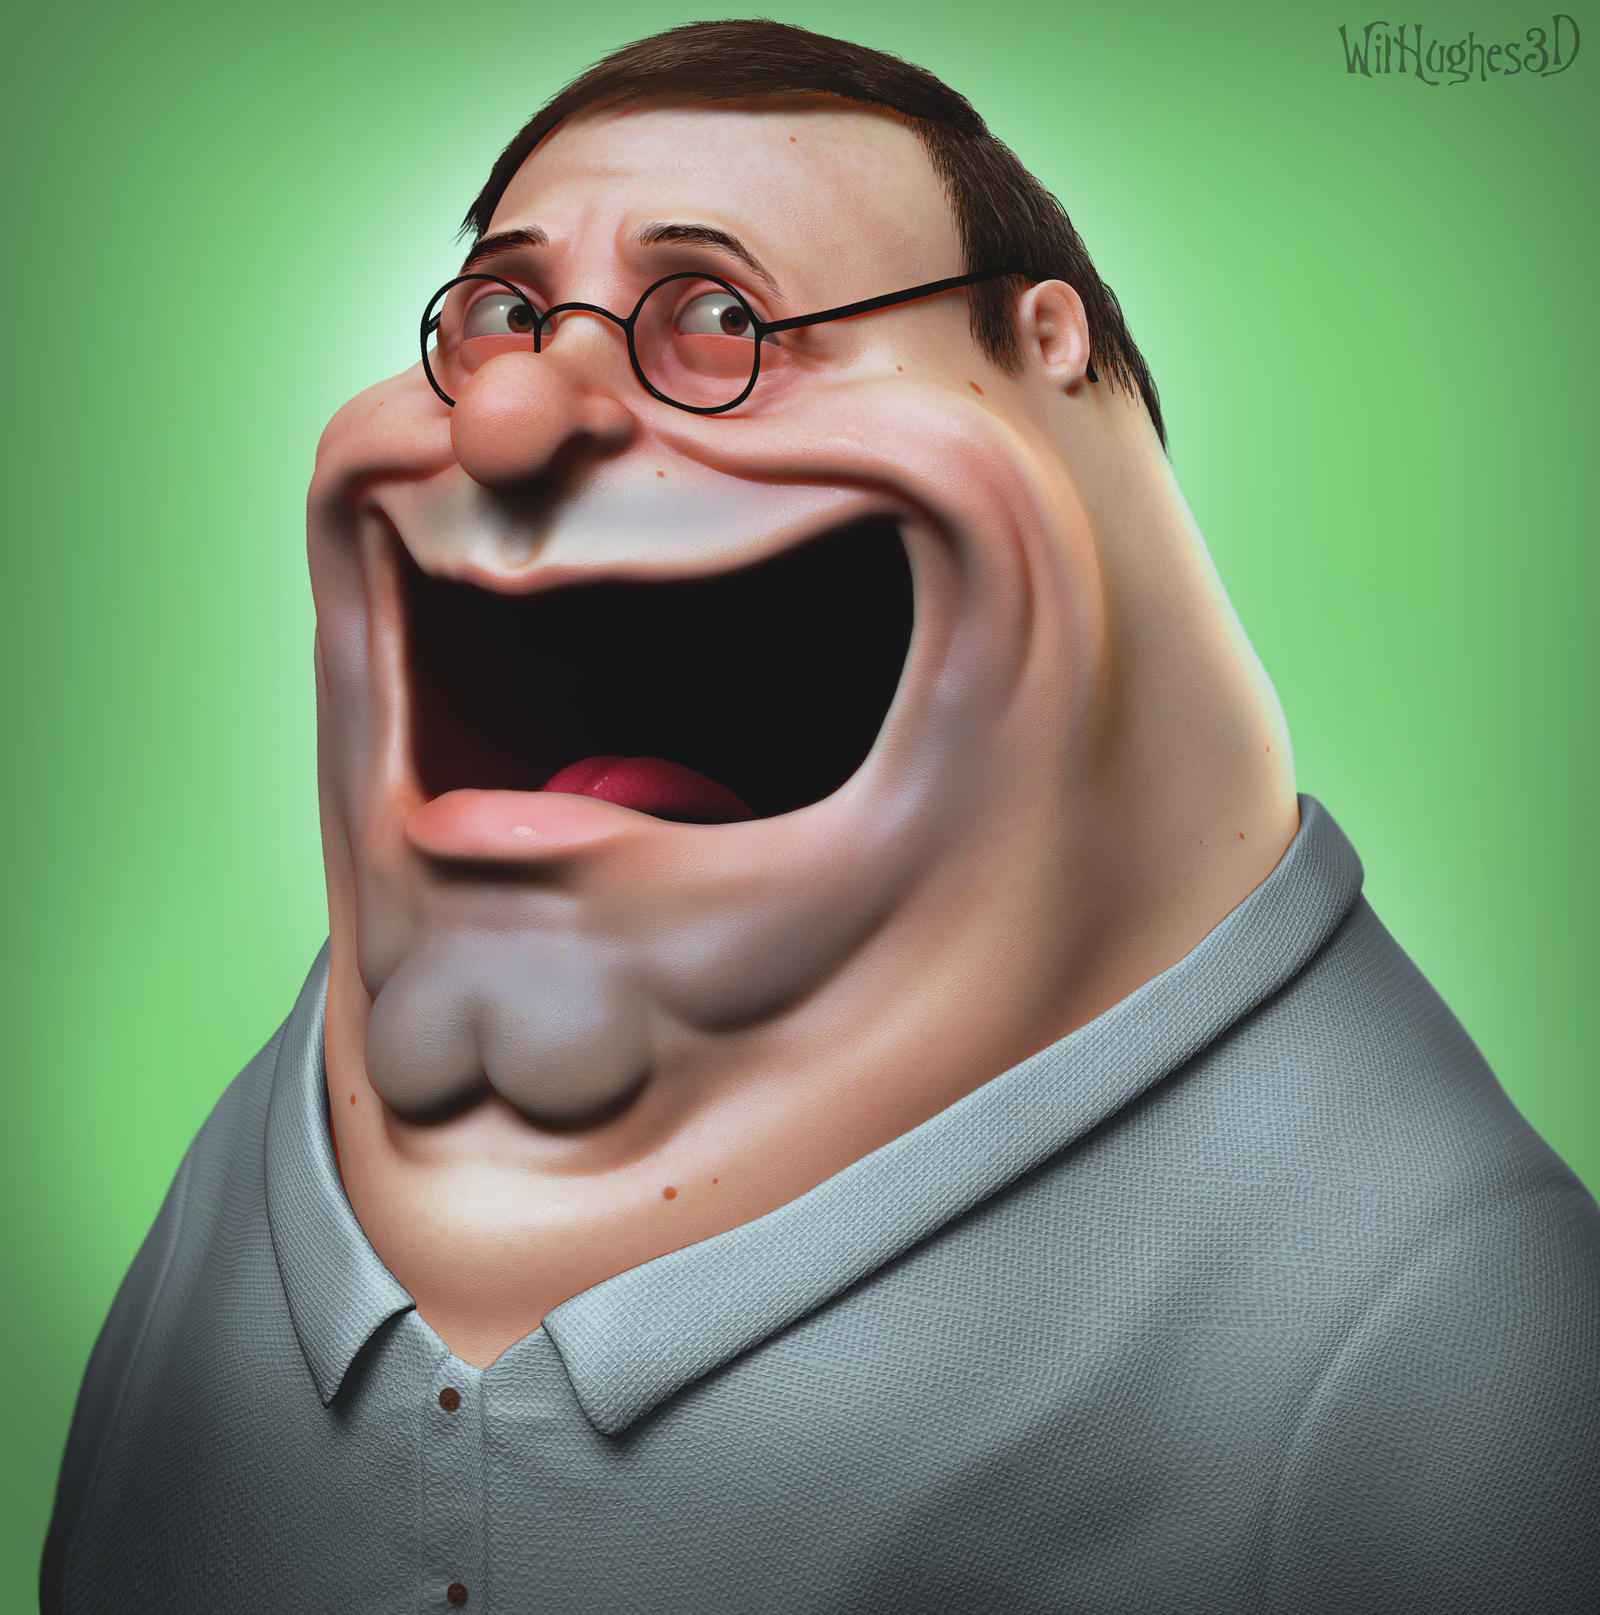 Peter Griffin by 90swil on DeviantArt